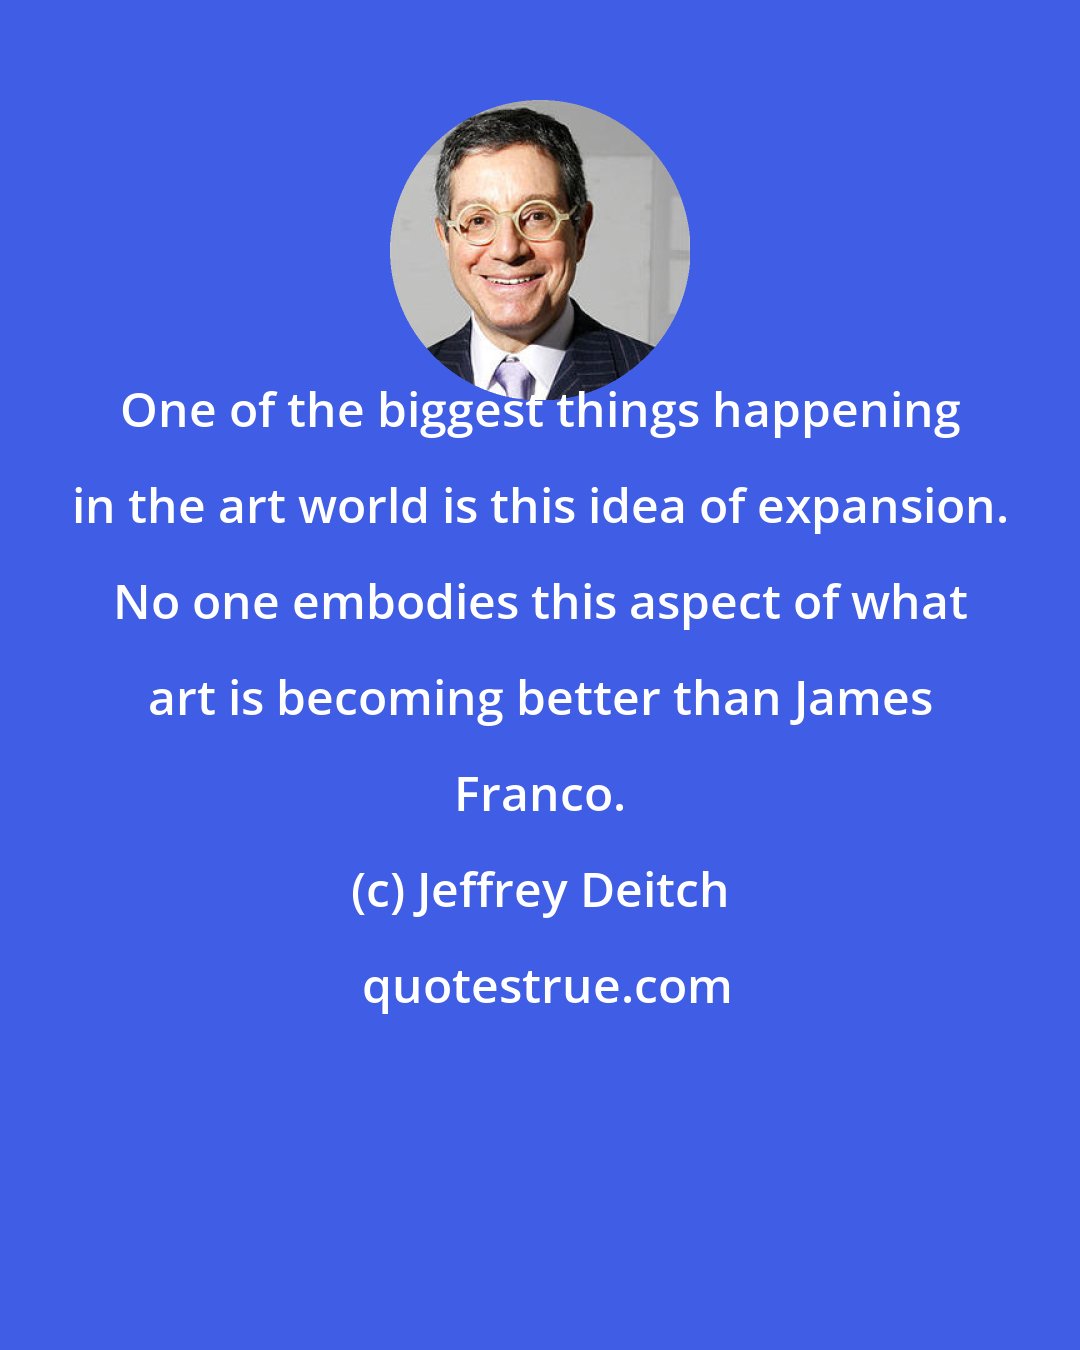 Jeffrey Deitch: One of the biggest things happening in the art world is this idea of expansion. No one embodies this aspect of what art is becoming better than James Franco.